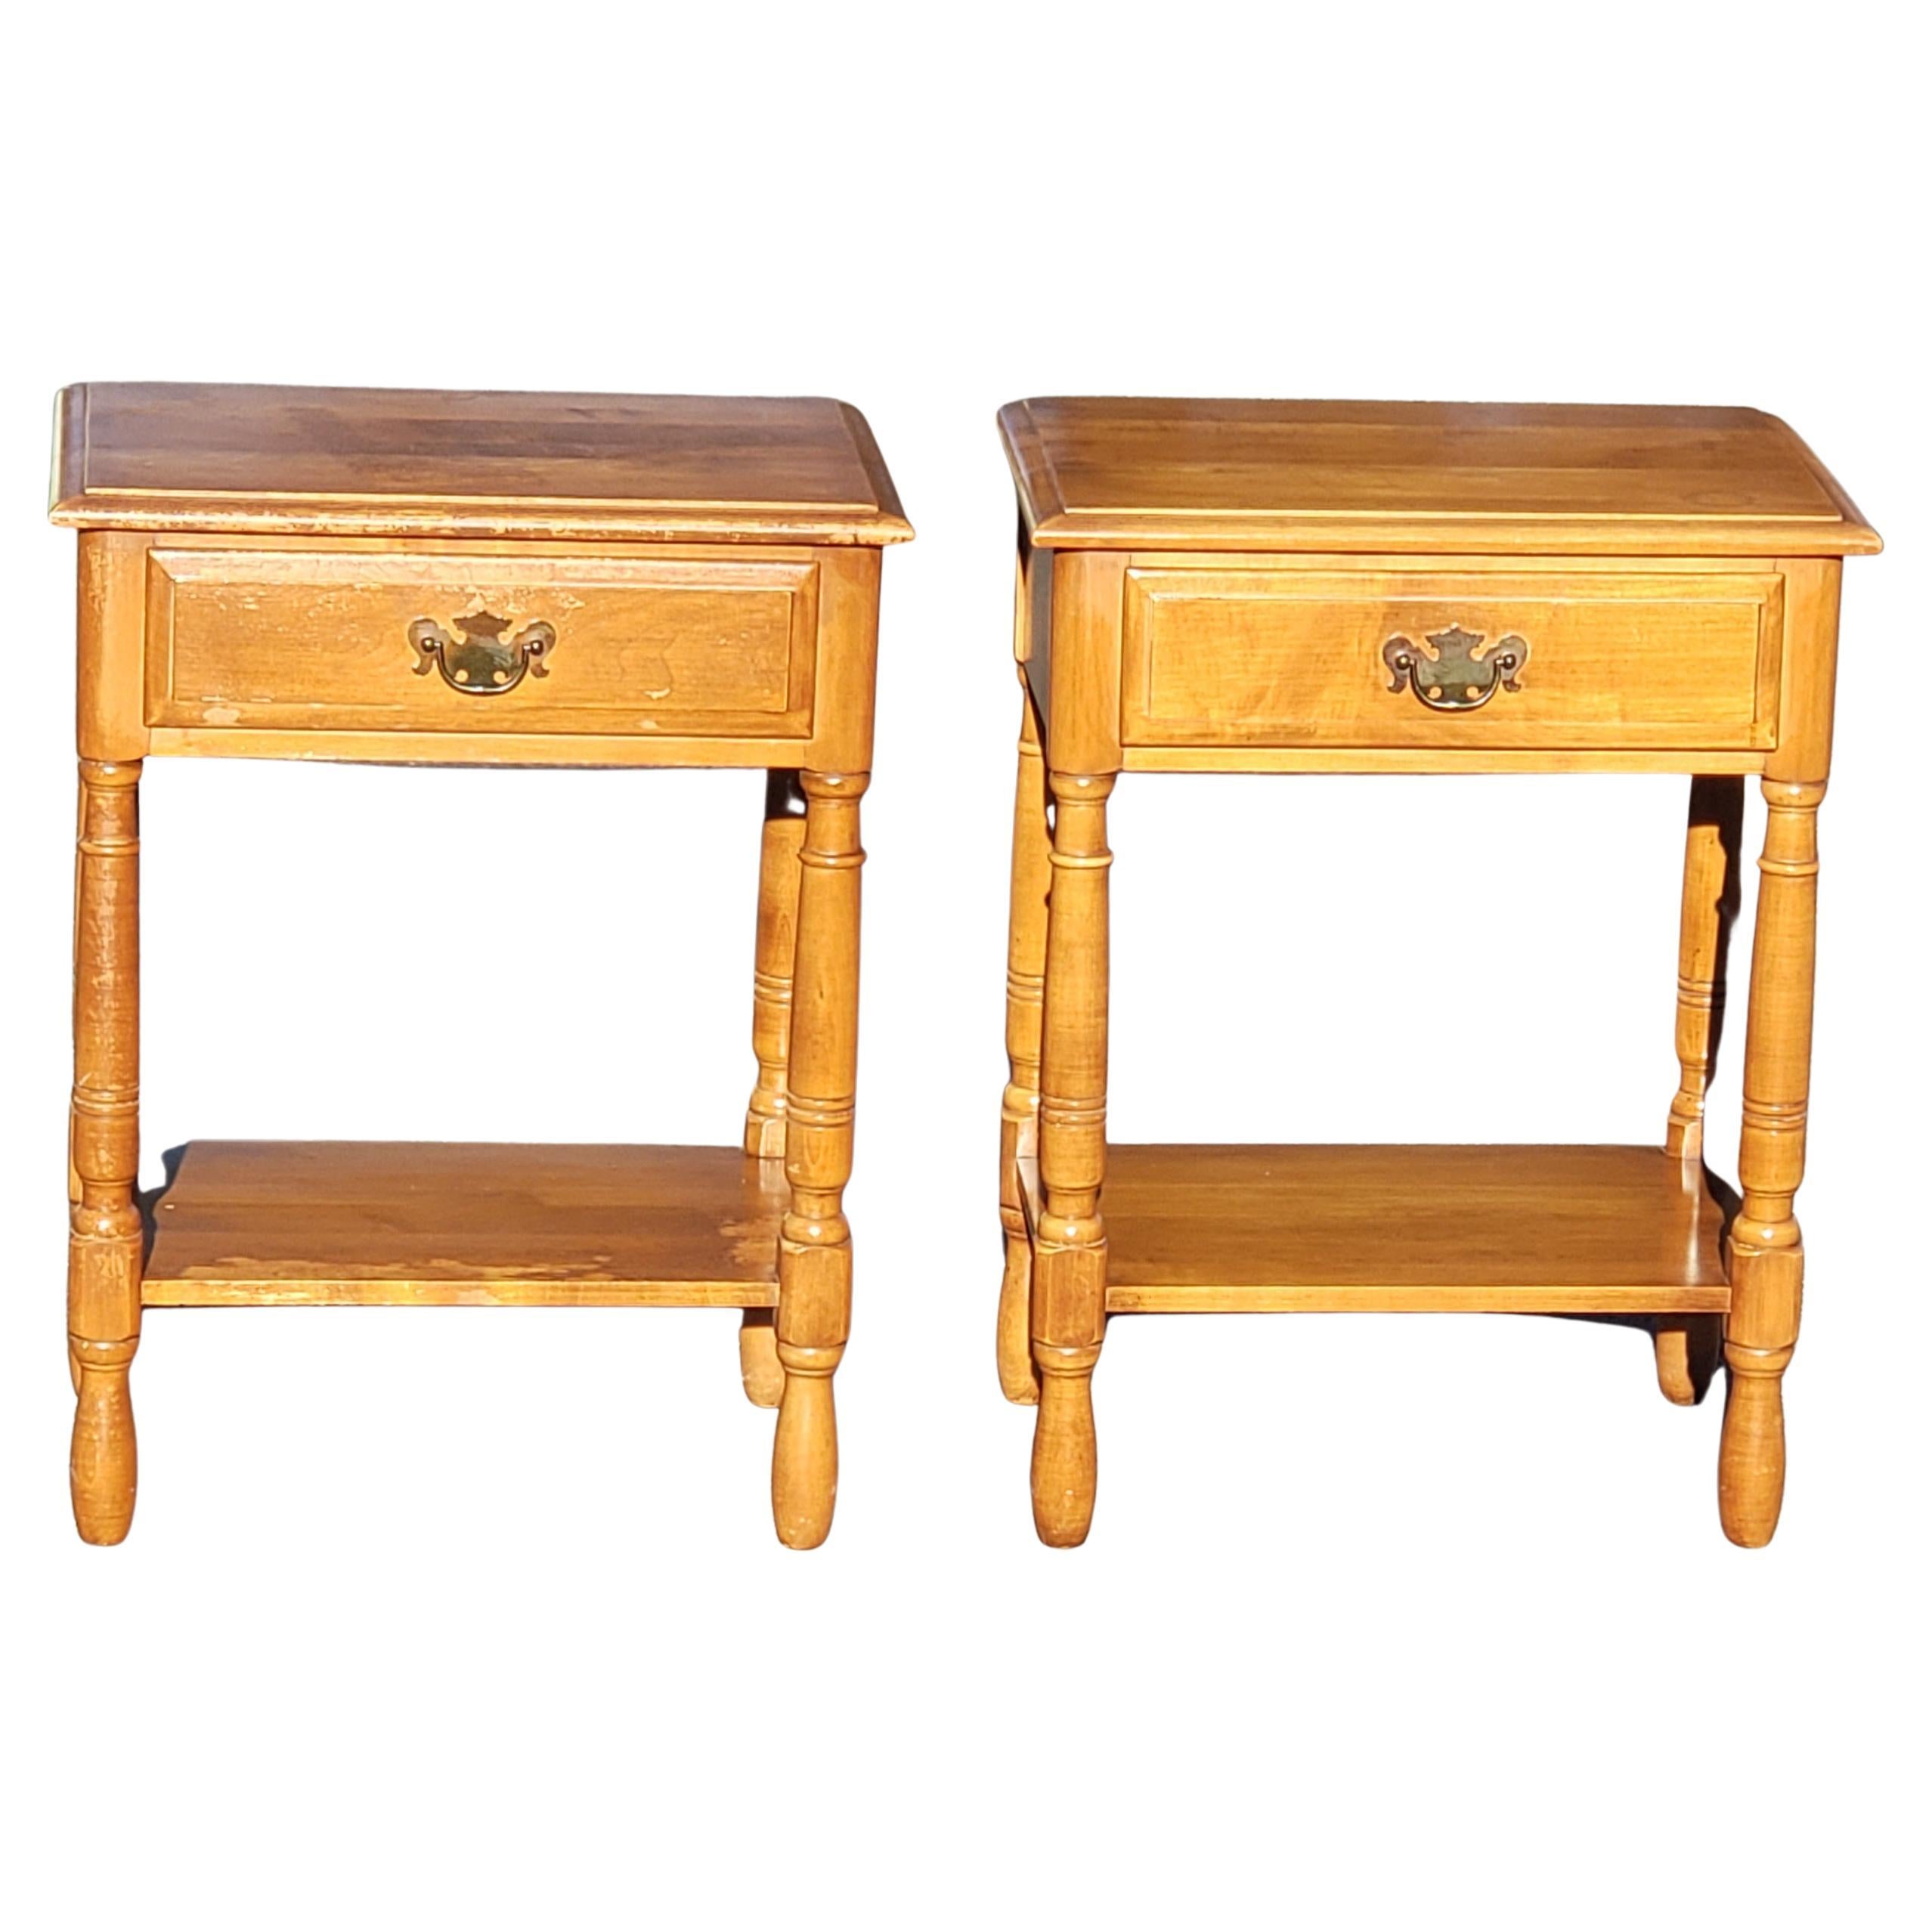 1950s Kling Solid Maple American Colonial Side Table Nighstands a Pair In Good Condition For Sale In Germantown, MD